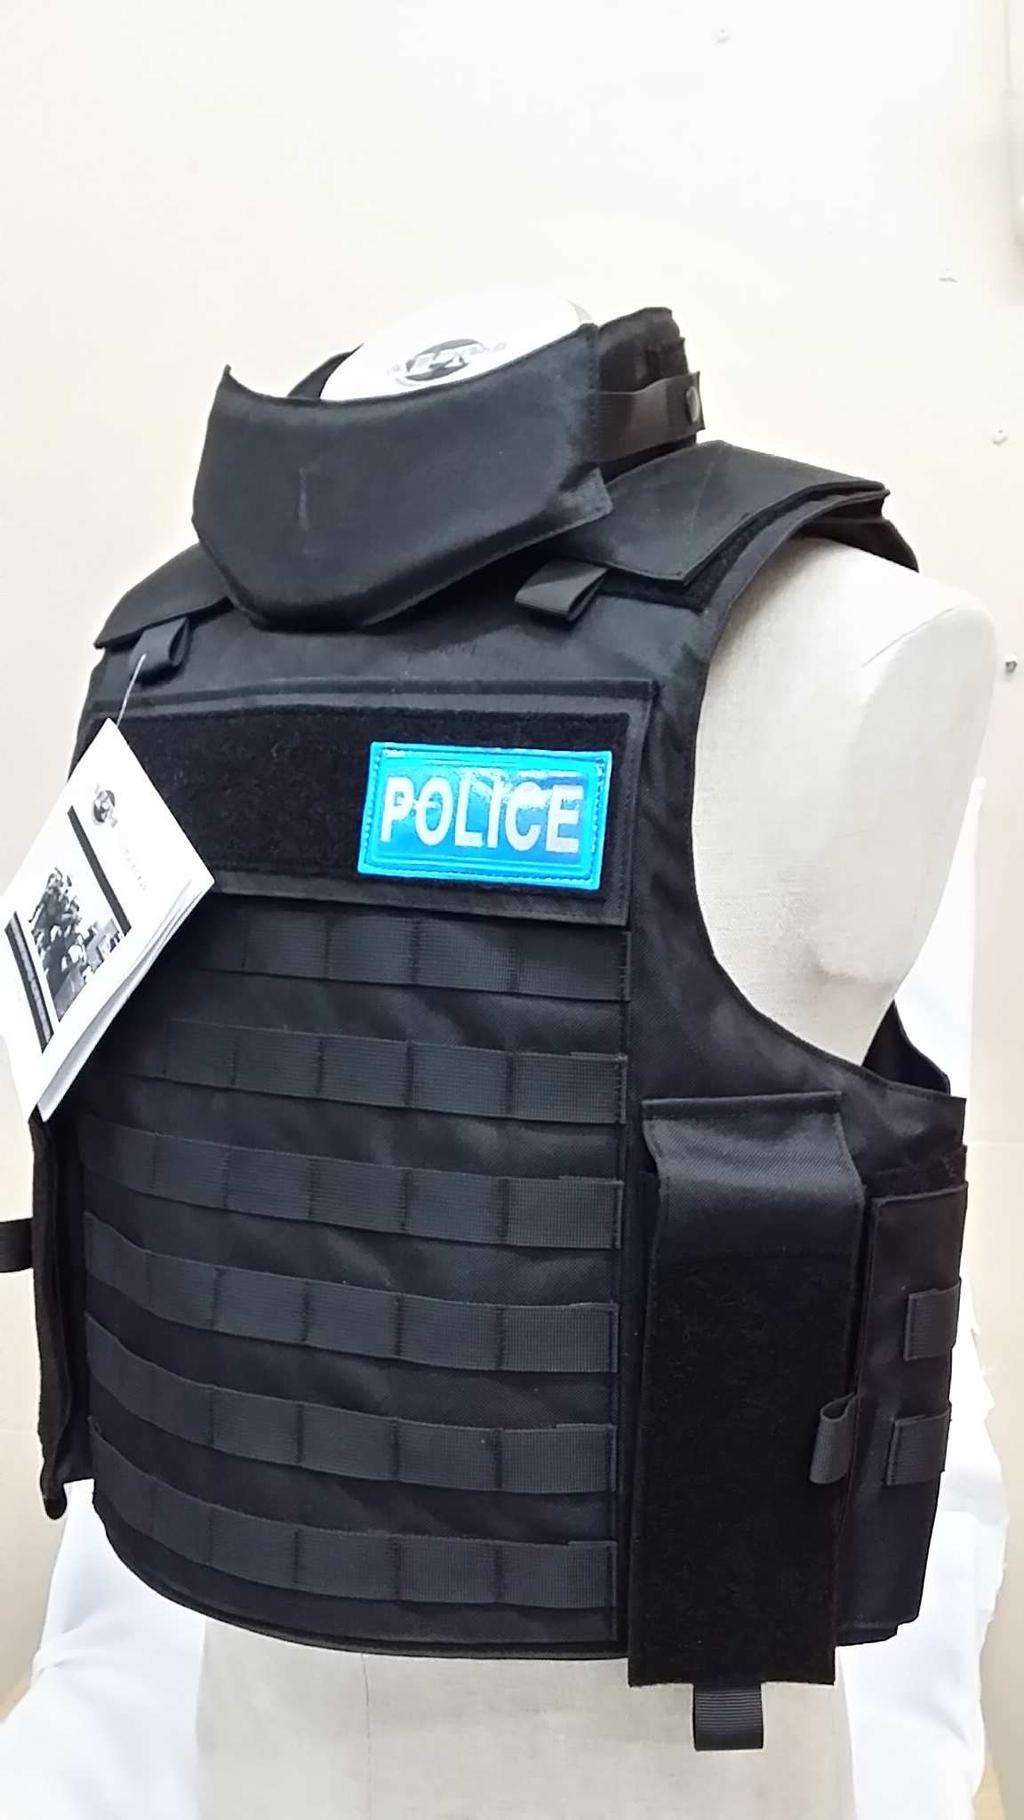 M/ BODY ARMOUR VESTS NIJ PROTECTION: PROTECTION: IIIA-0101,06 357 SIG FMJ FN 125gr,44 Magnum SJHP 240gr FRONT VIEW MATERIAL Tactical 8304V3 Bodyarmour Oxford 600 Denier *Soft panels with large